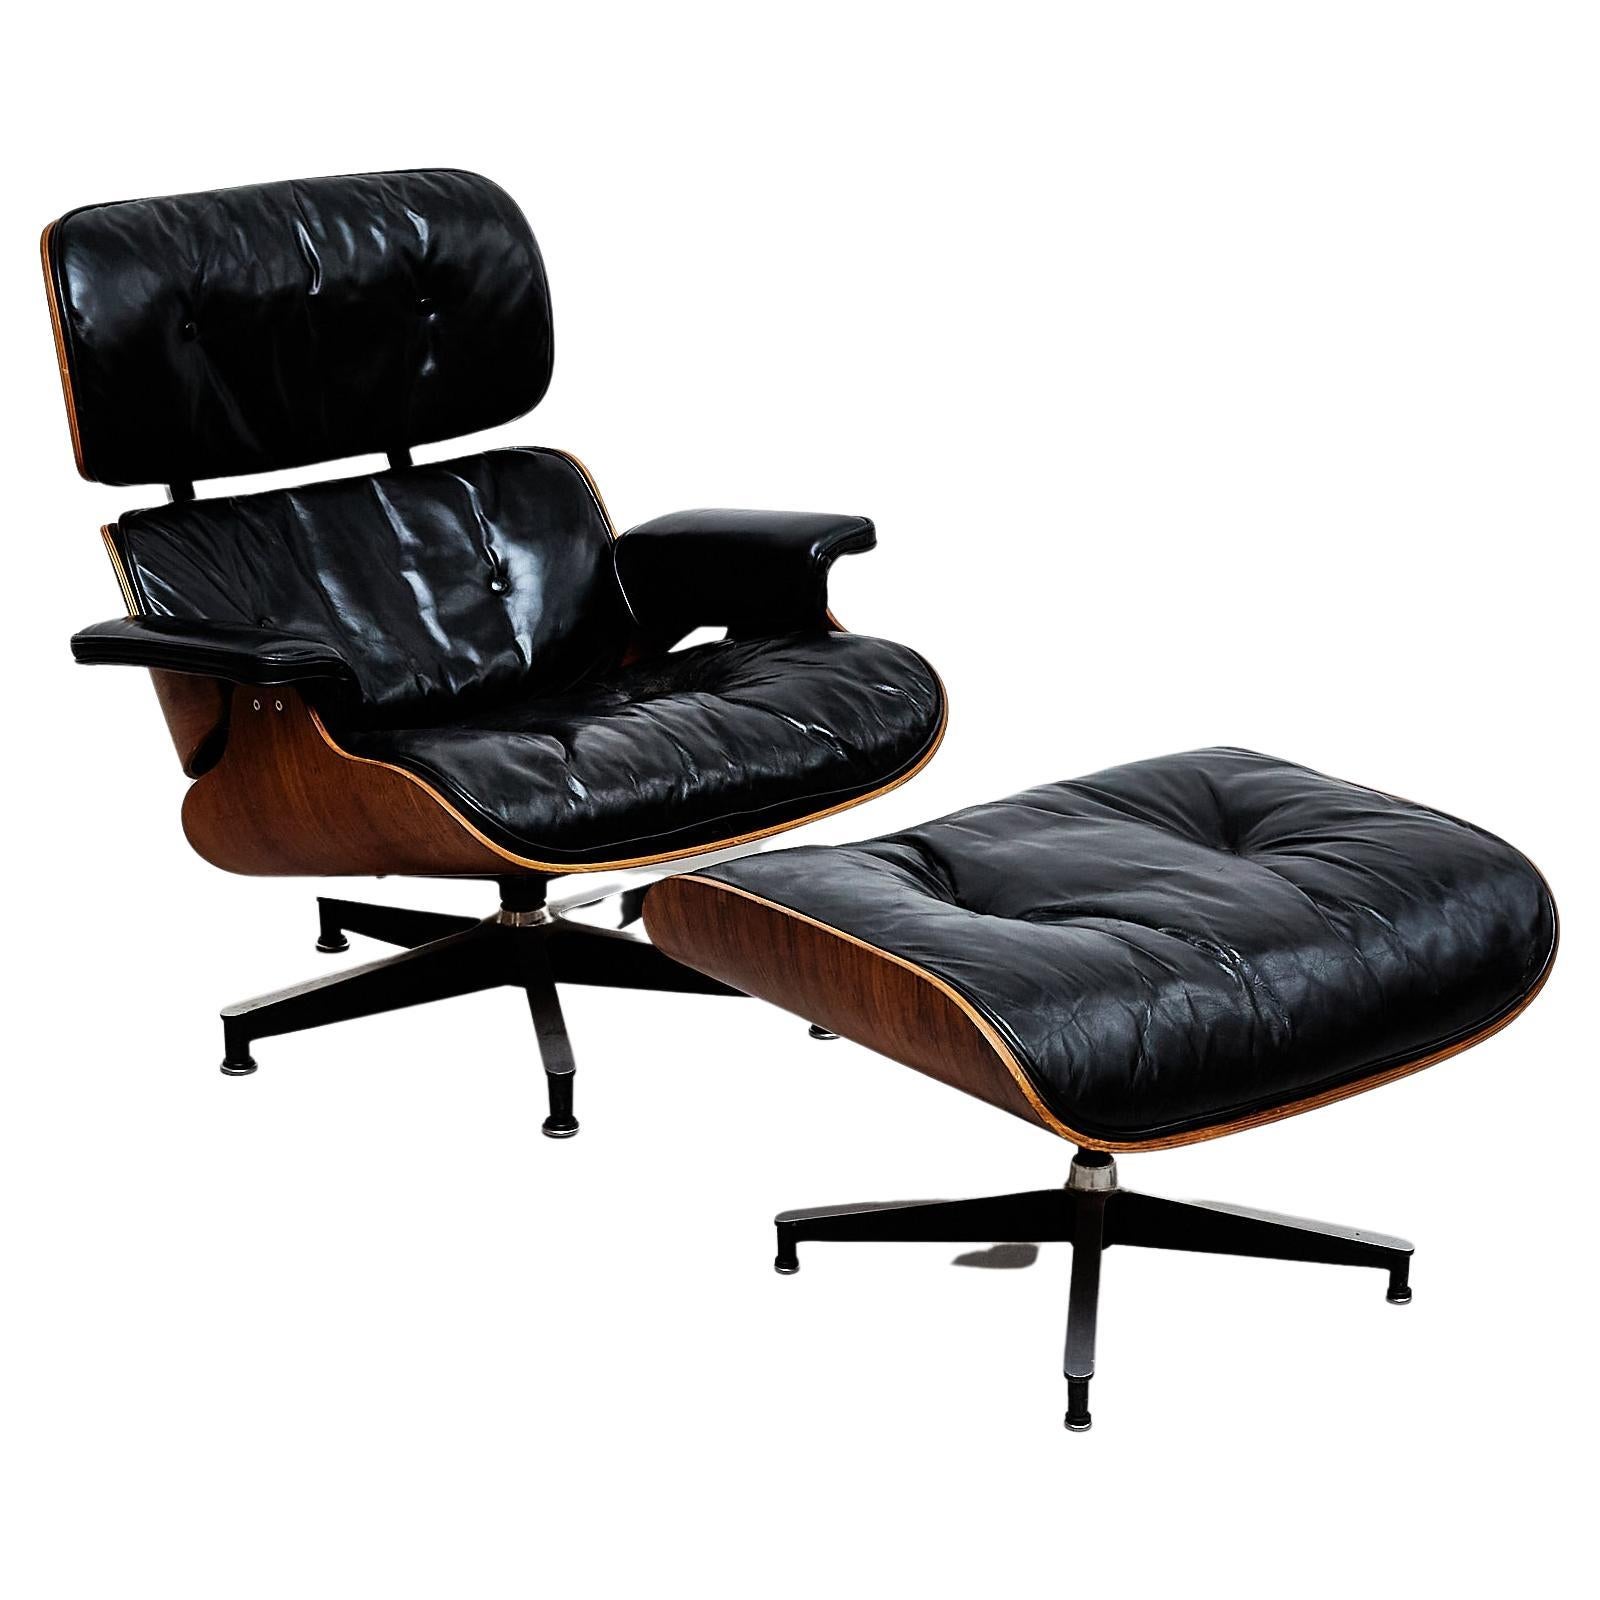 Eames Lounge Chair and Ottoman by Herman Miller, circa 1950